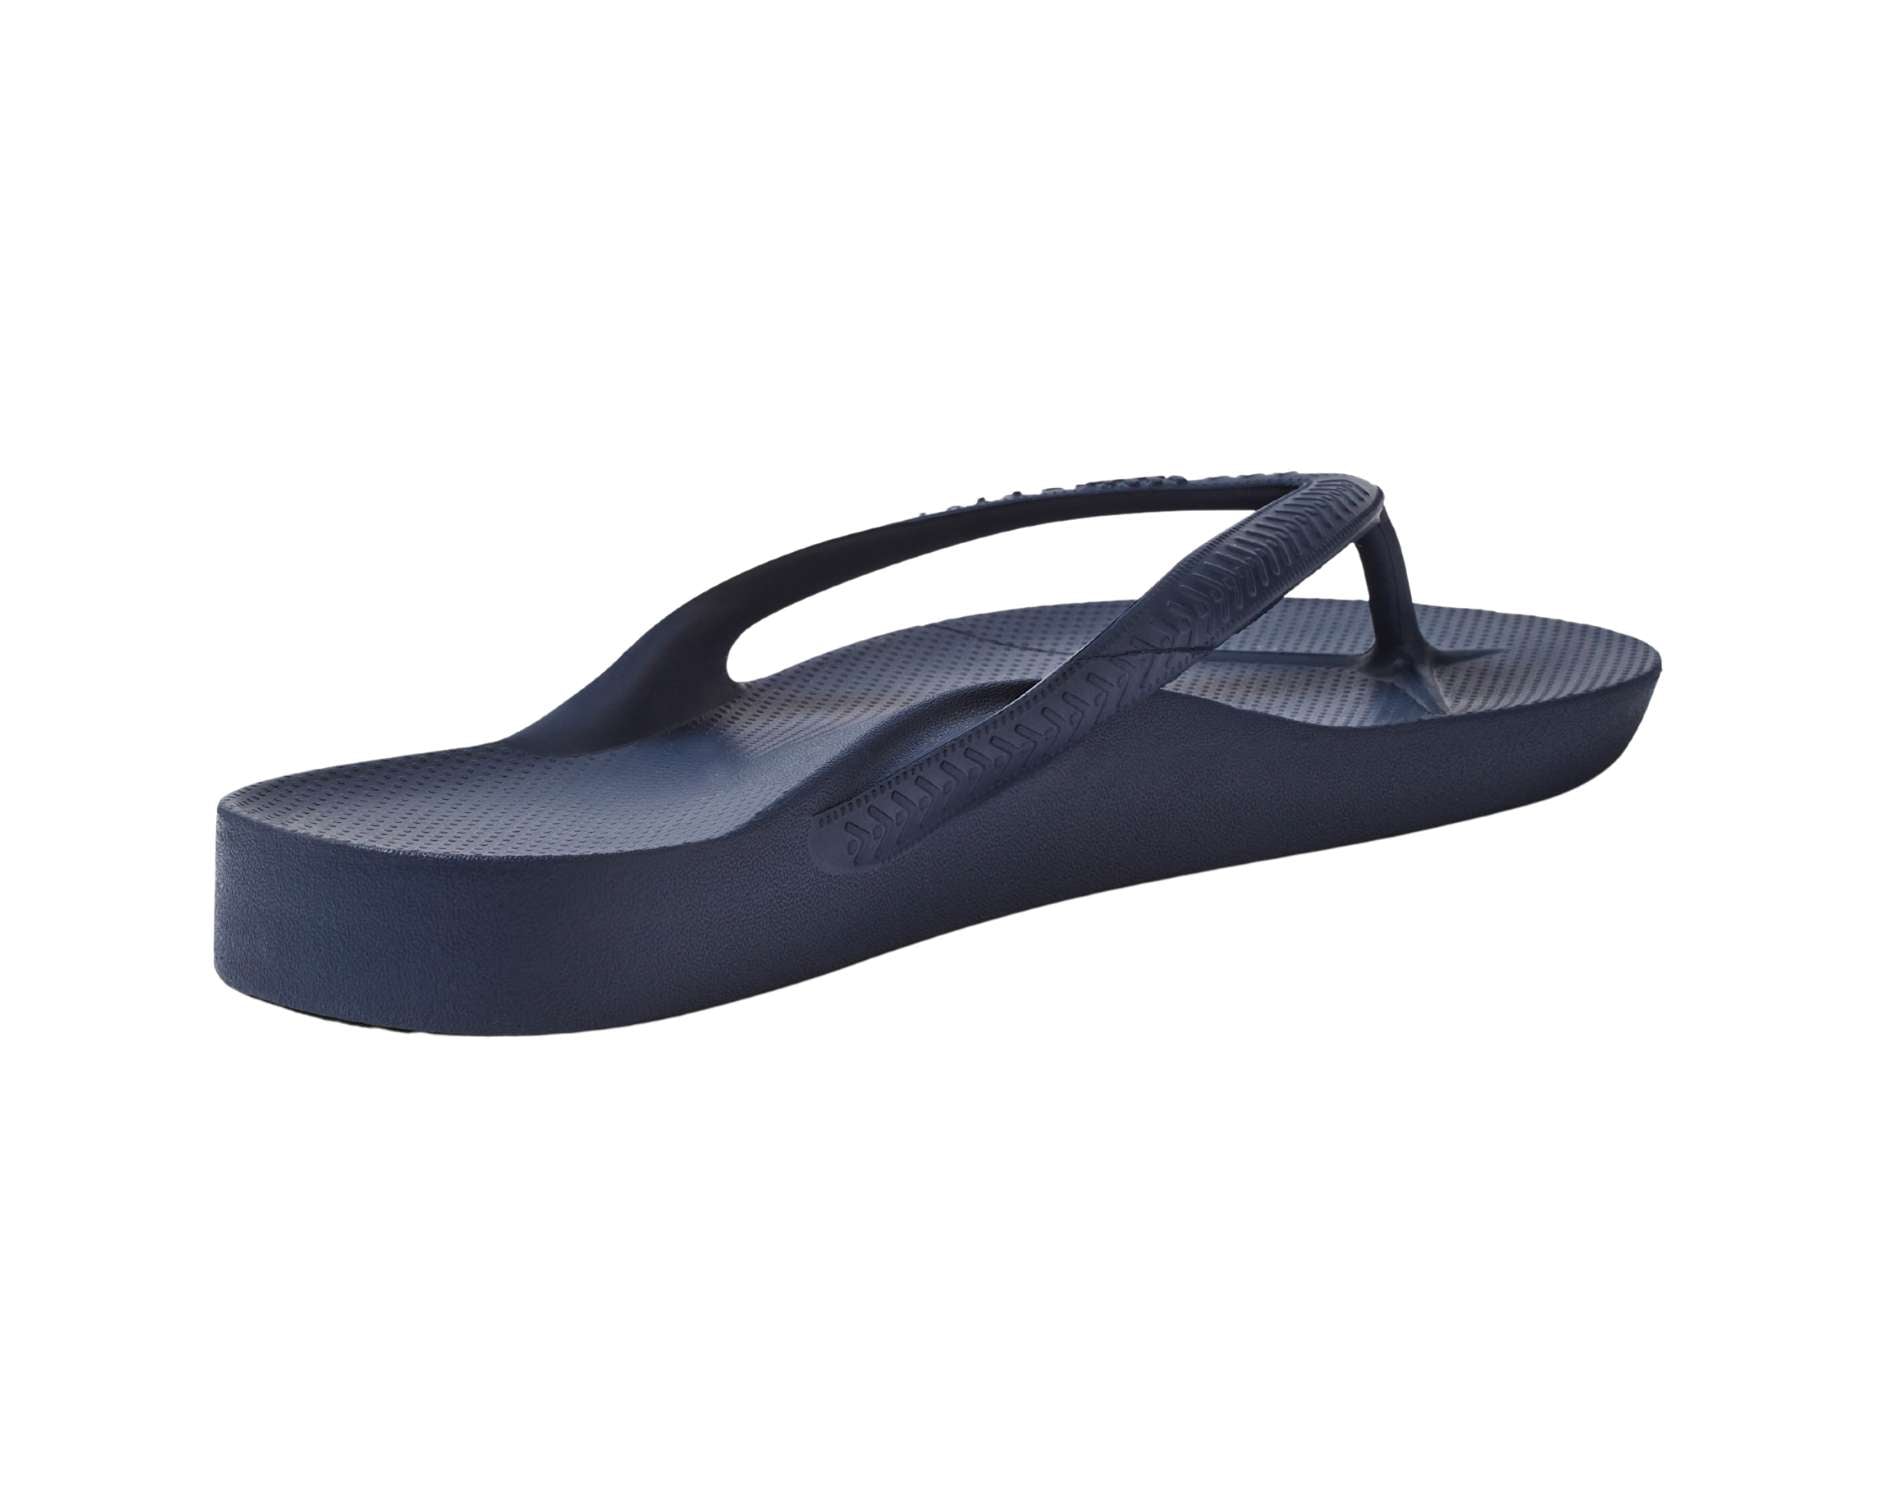 ARCHIES- Arch Support Thongs Kids - Coral - Feet First Podiatry Centre